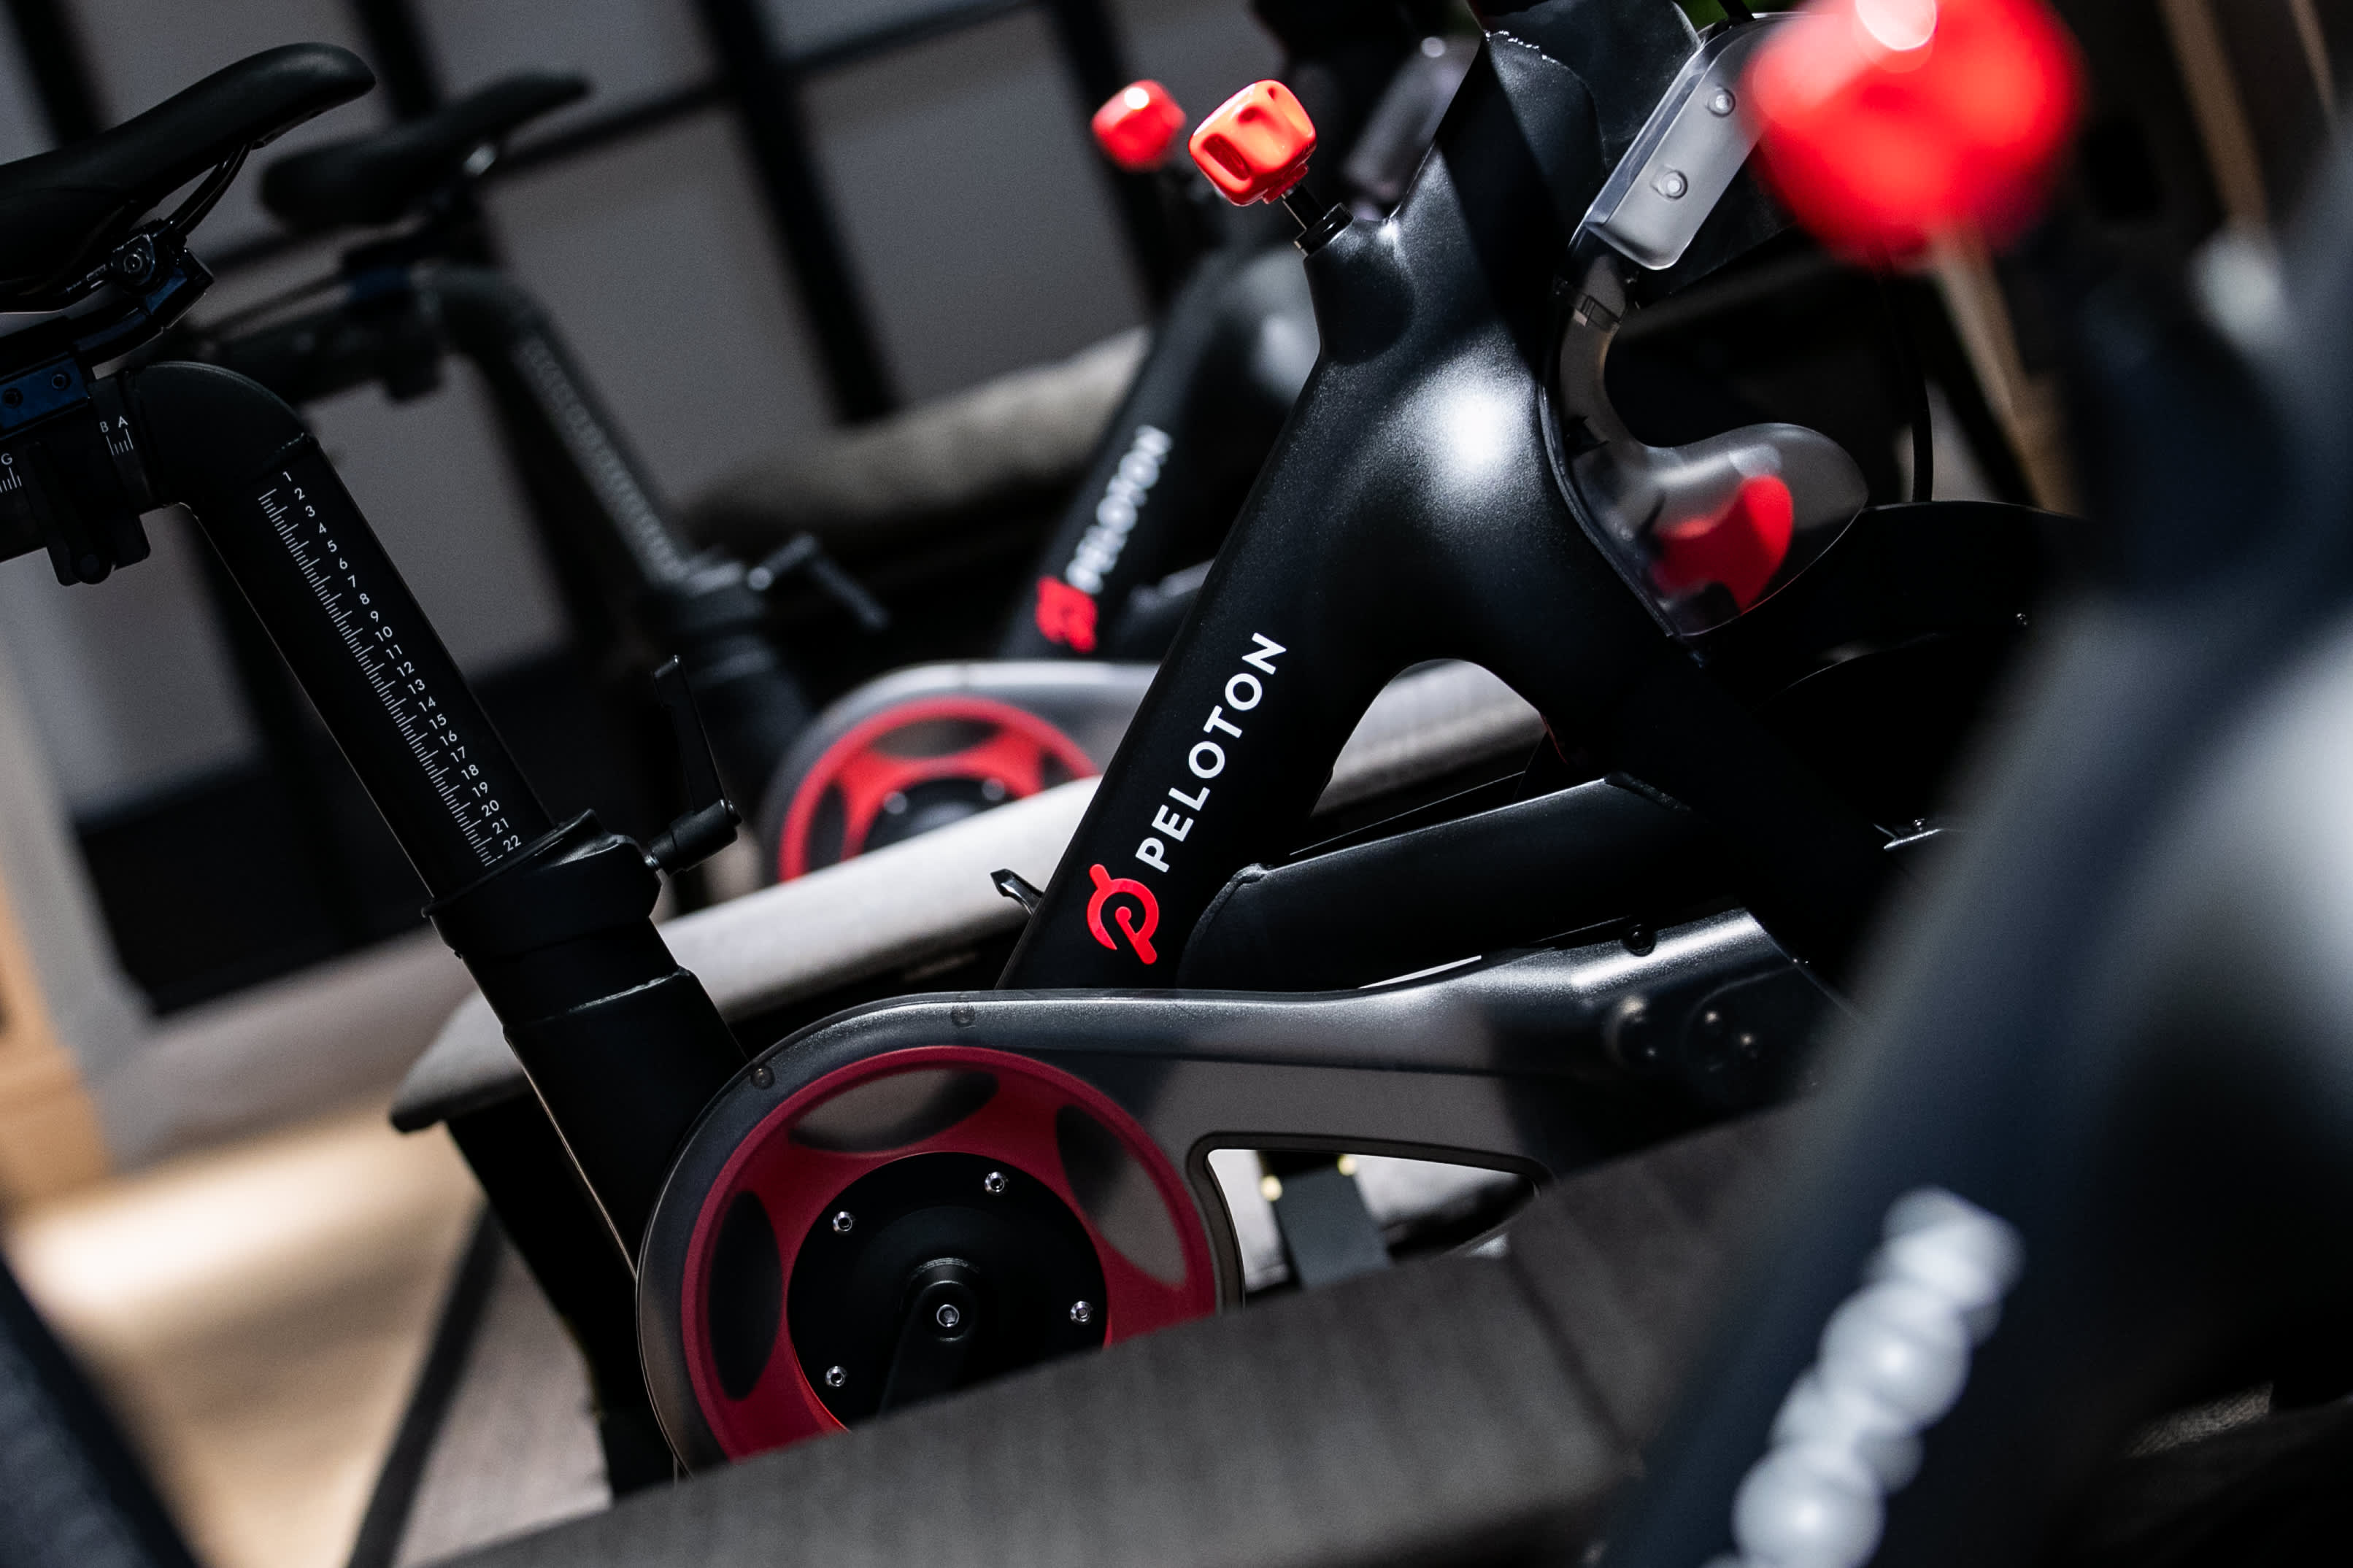 Peloton (PTON) reports second quarter 2021 earnings, sales exceeded